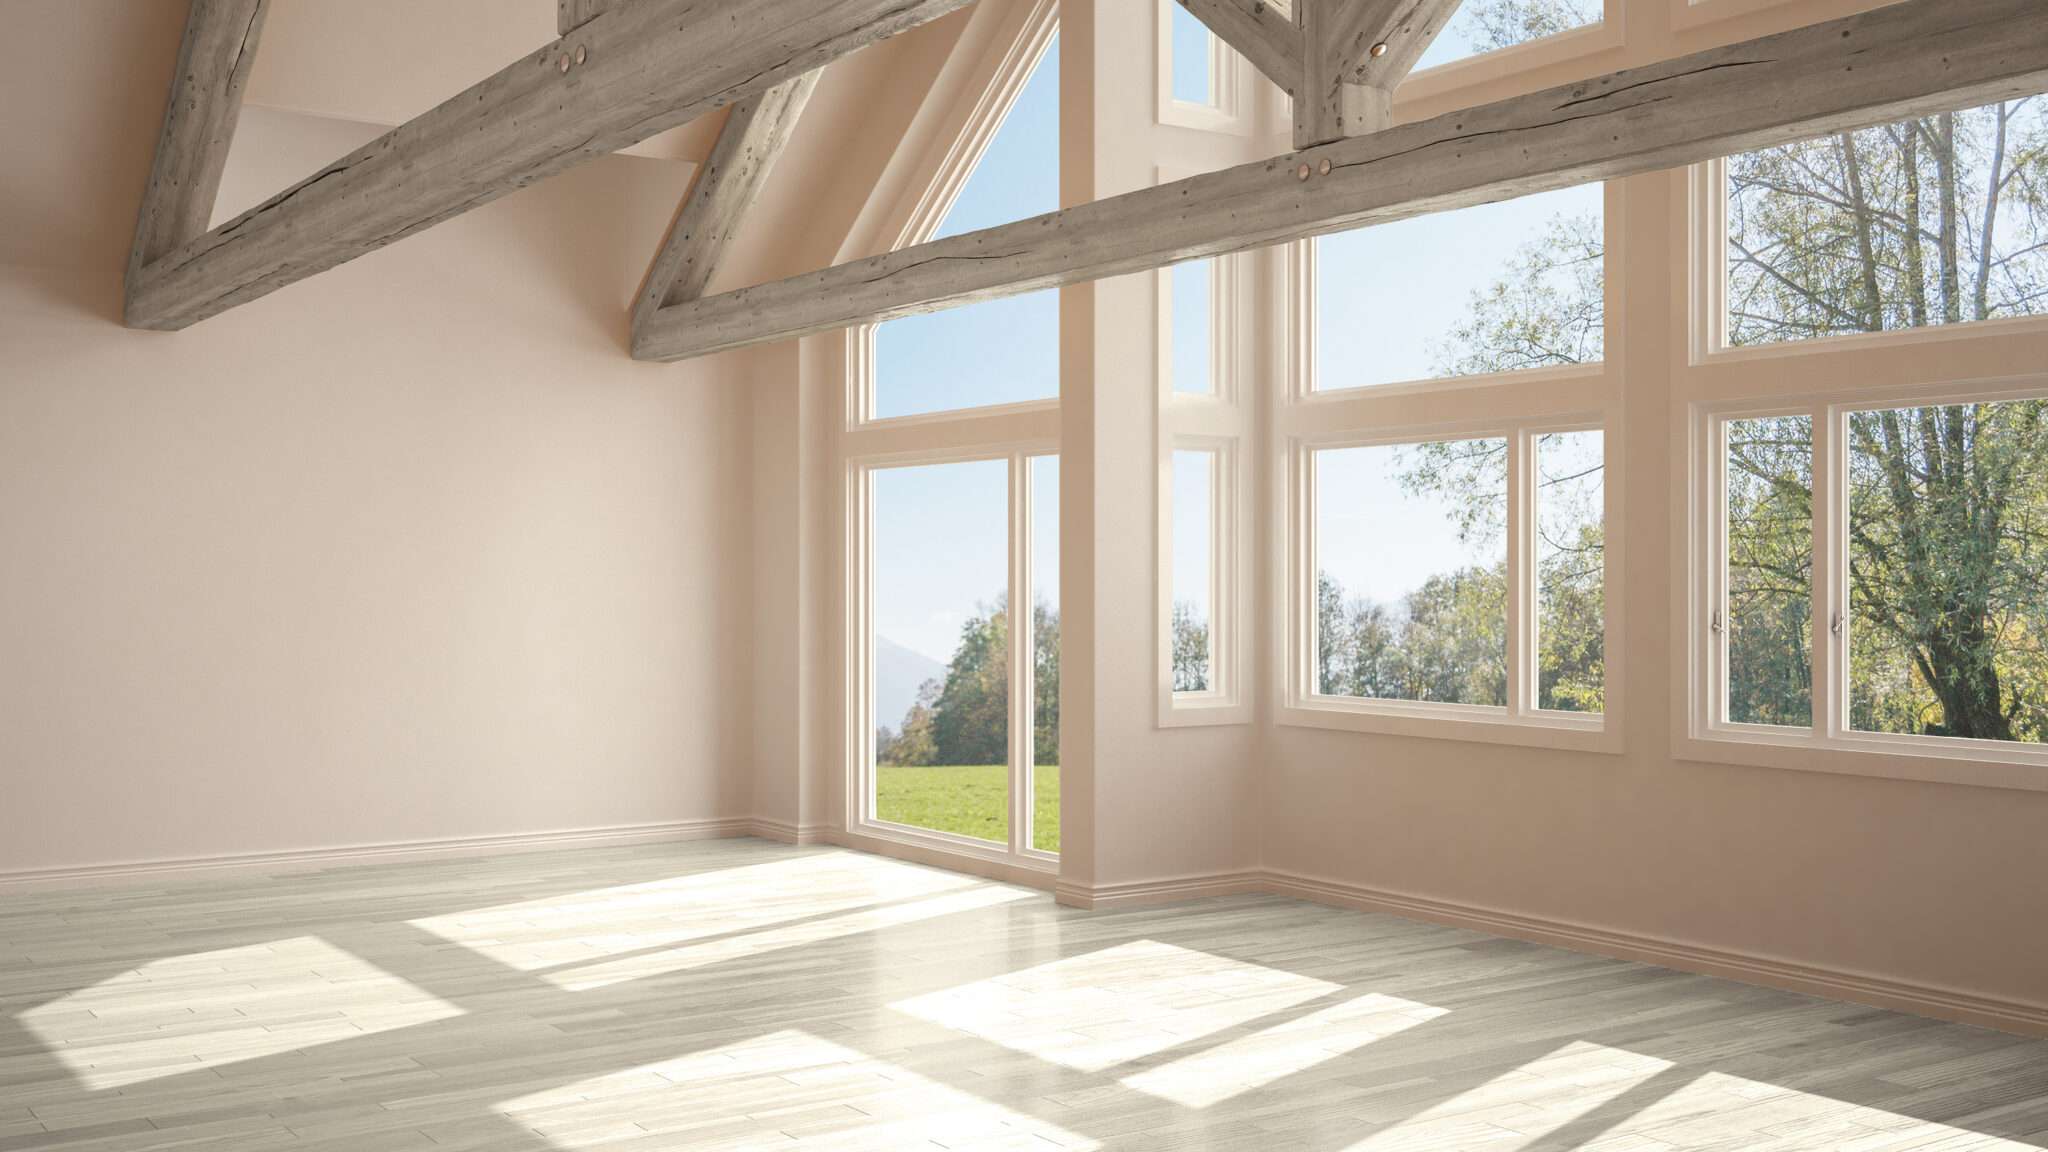 Large windows and door with glass in empty room with wood beams